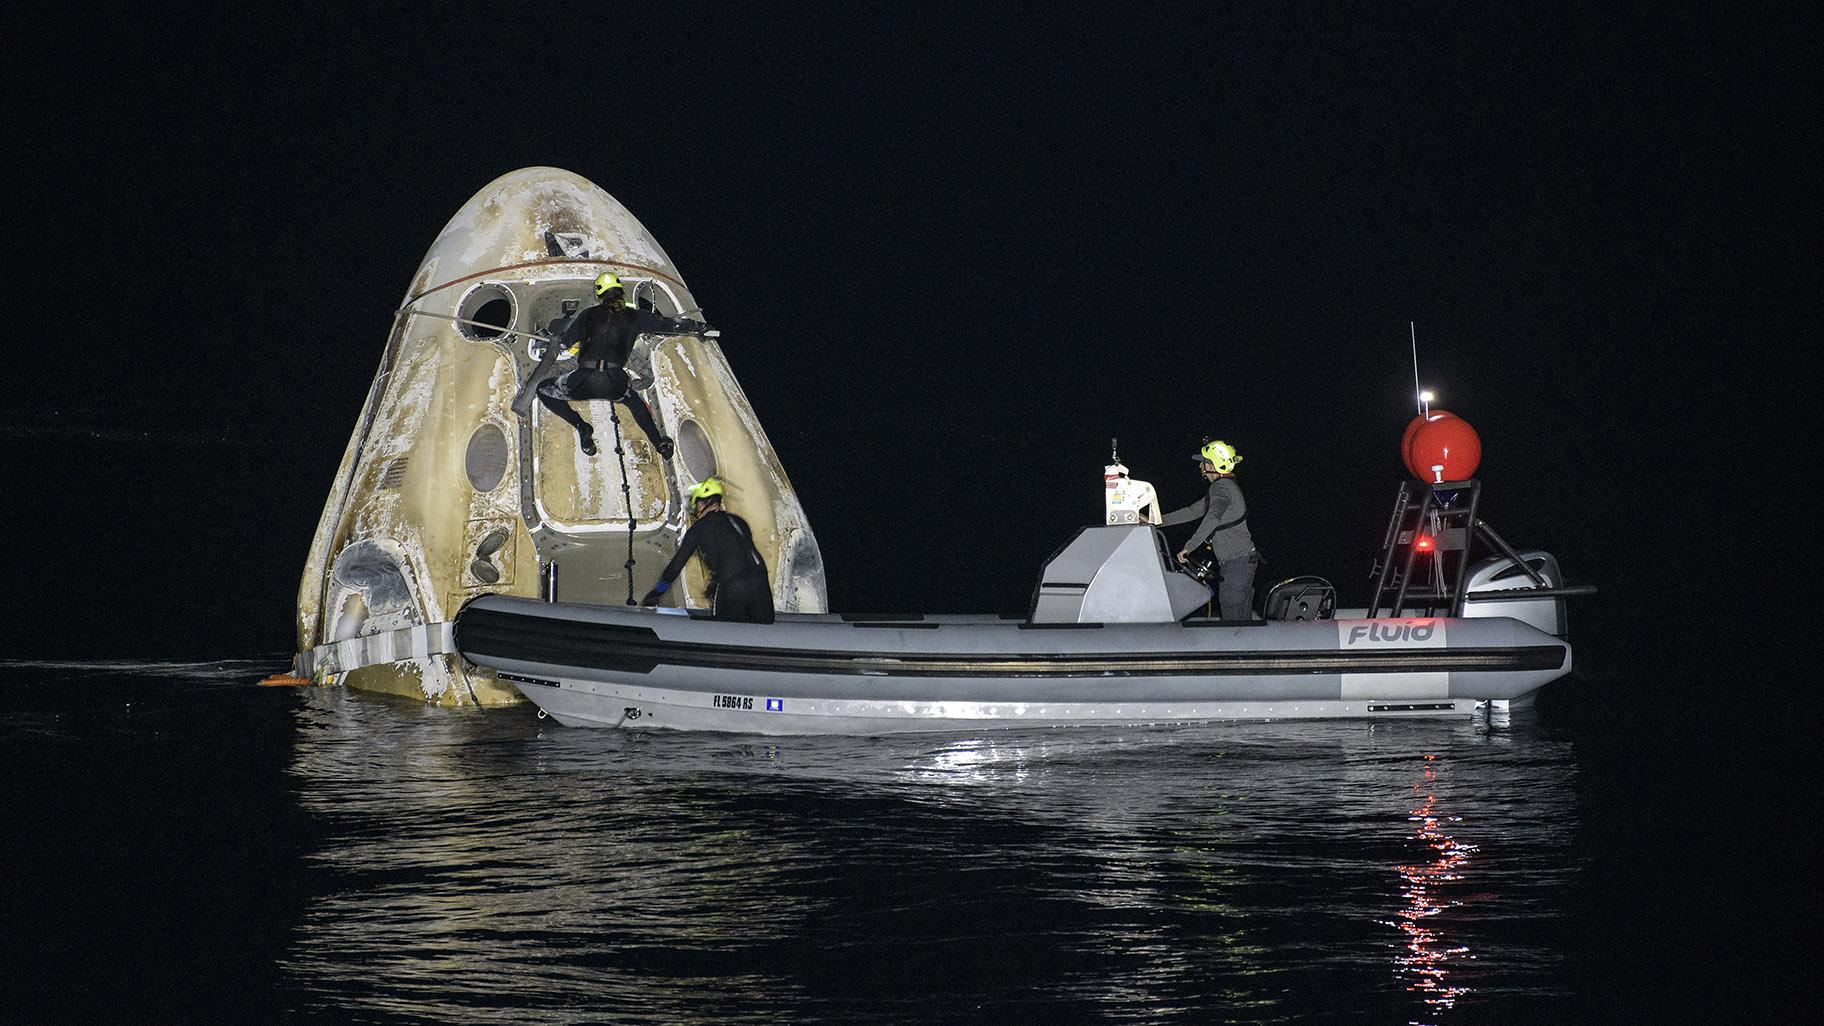 Support teams work around the SpaceX Crew Dragon Resilience spacecraft shortly after it landed with NASA astronauts Mike Hopkins, Shannon Walker, and Victor Glover, and Japan Aerospace Exploration Agency (JAXA) astronaut Soichi Noguchi aboard in the Gulf of Mexico off the coast of Panama City, Florida, Sunday, May 2, 2021. (Bill Ingalls / NASA via AP)